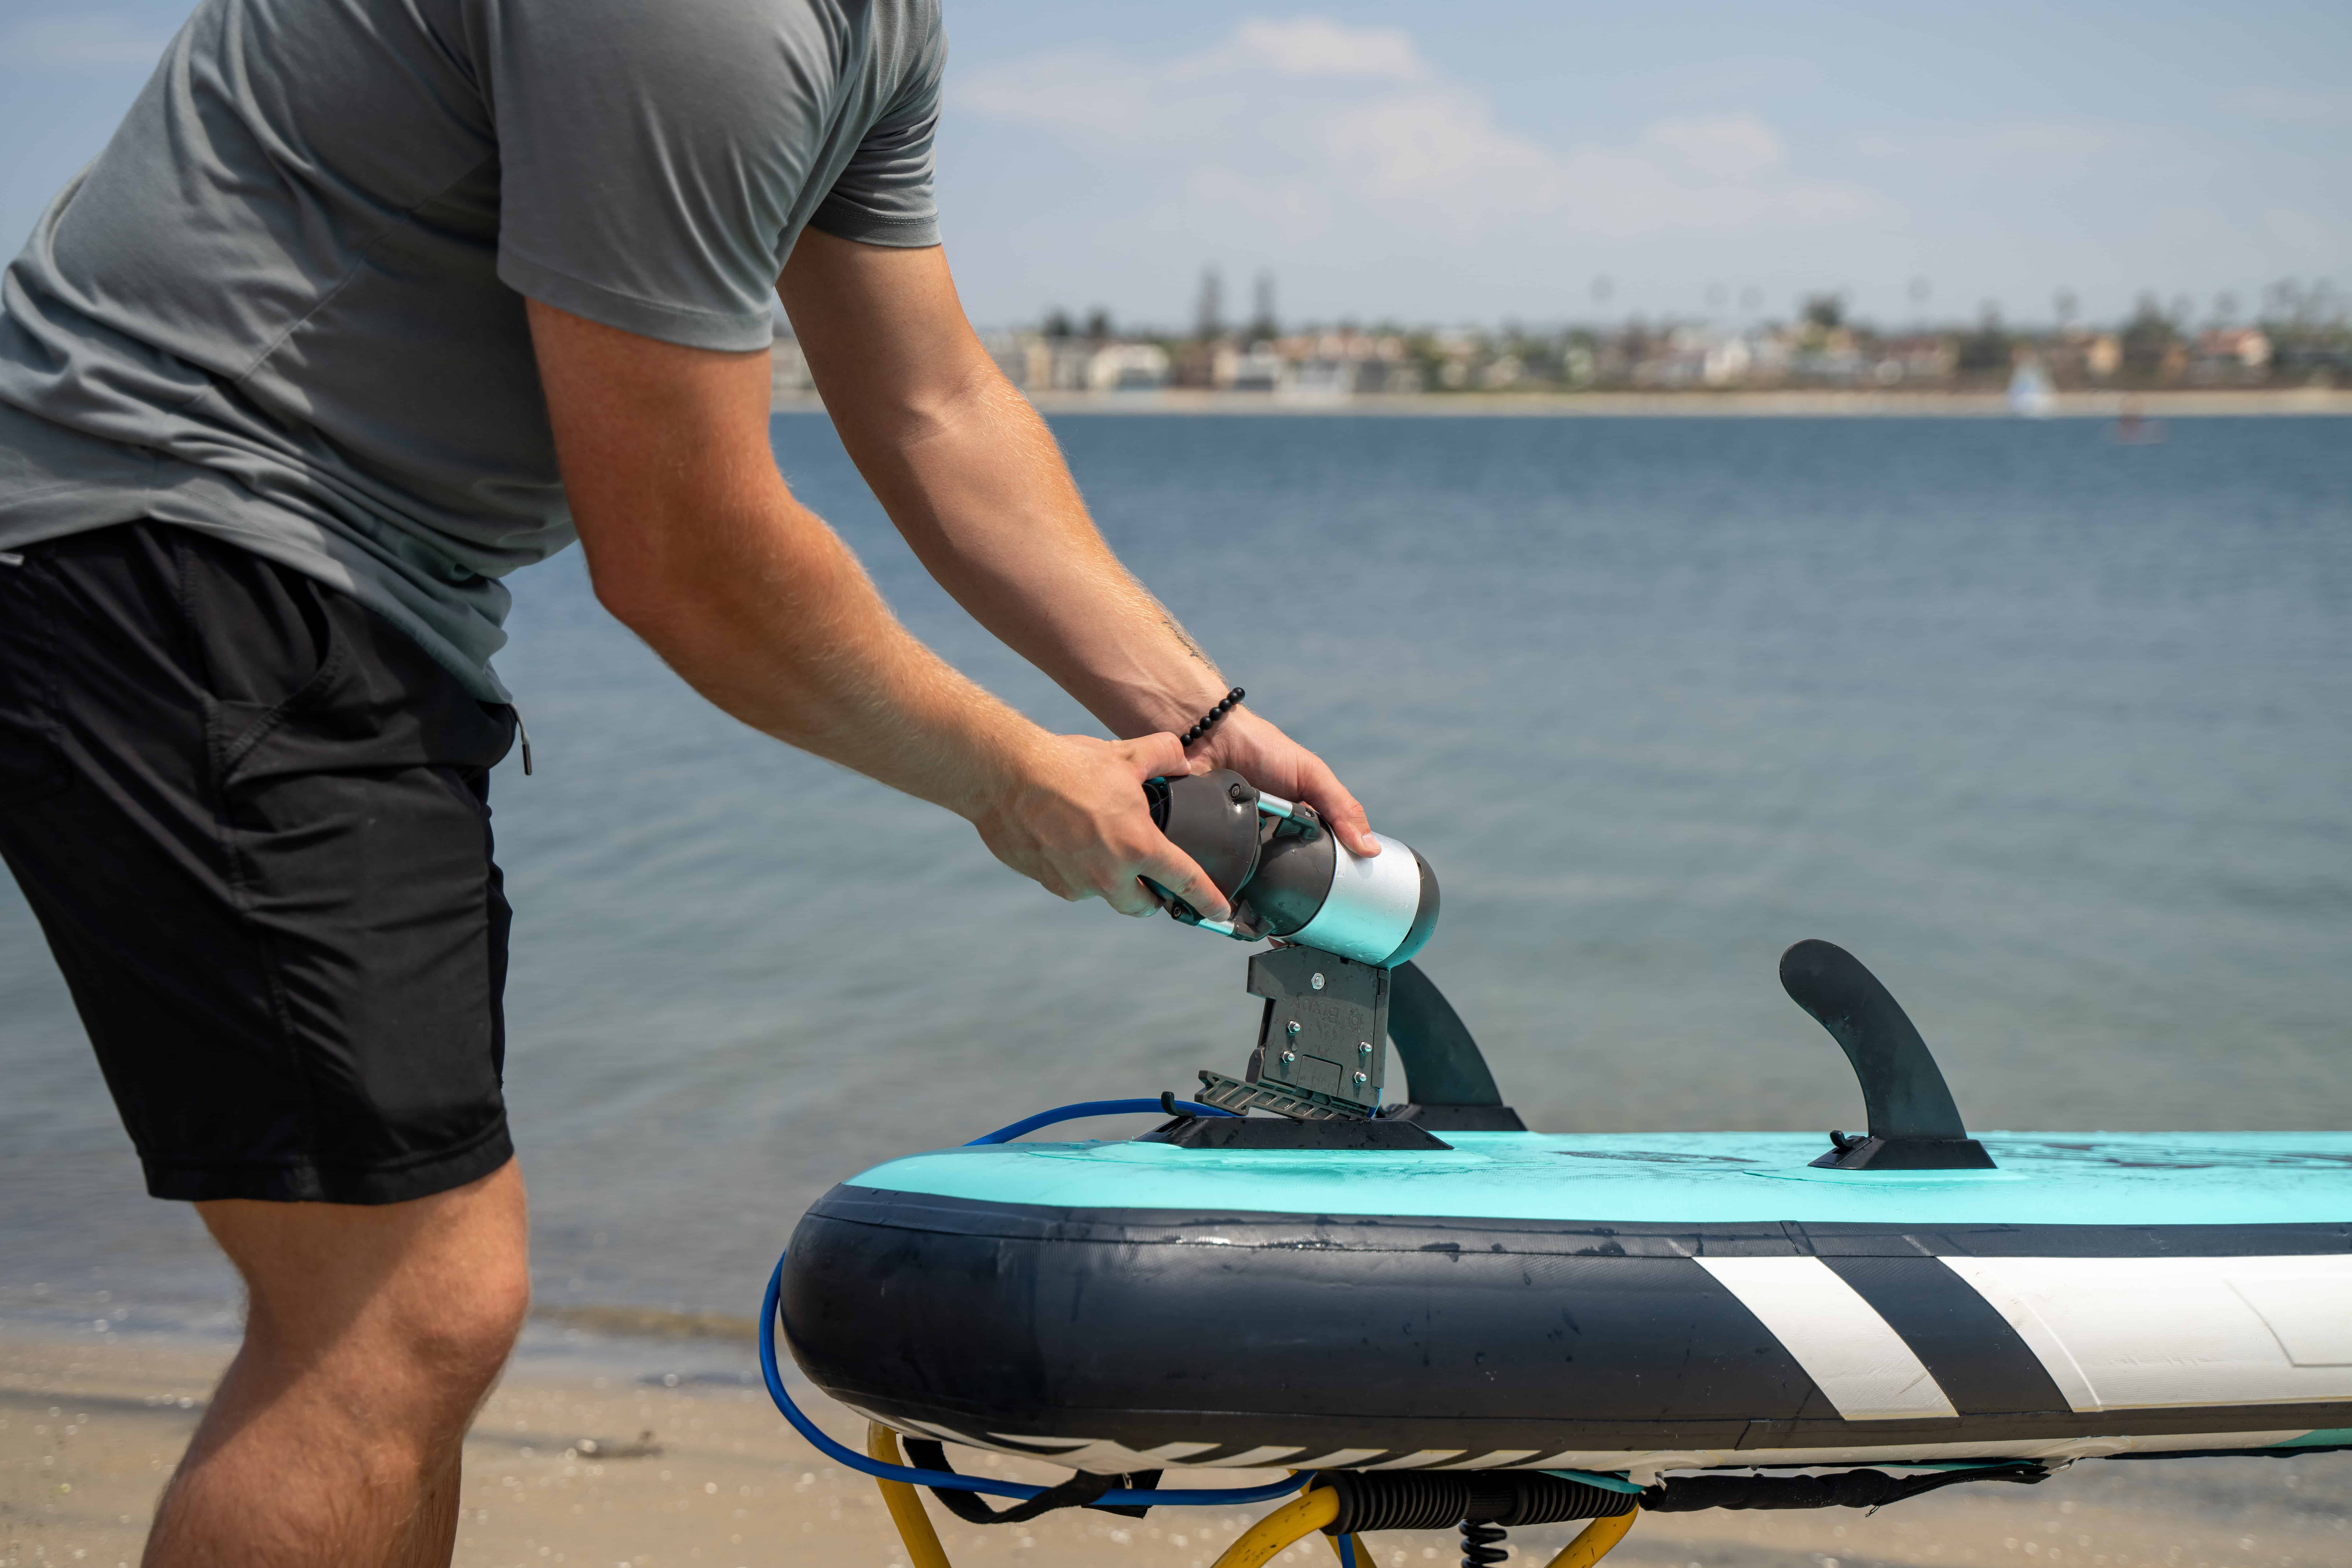 Adding Bixpy K-1 Motor with Adapter to Paddle Board